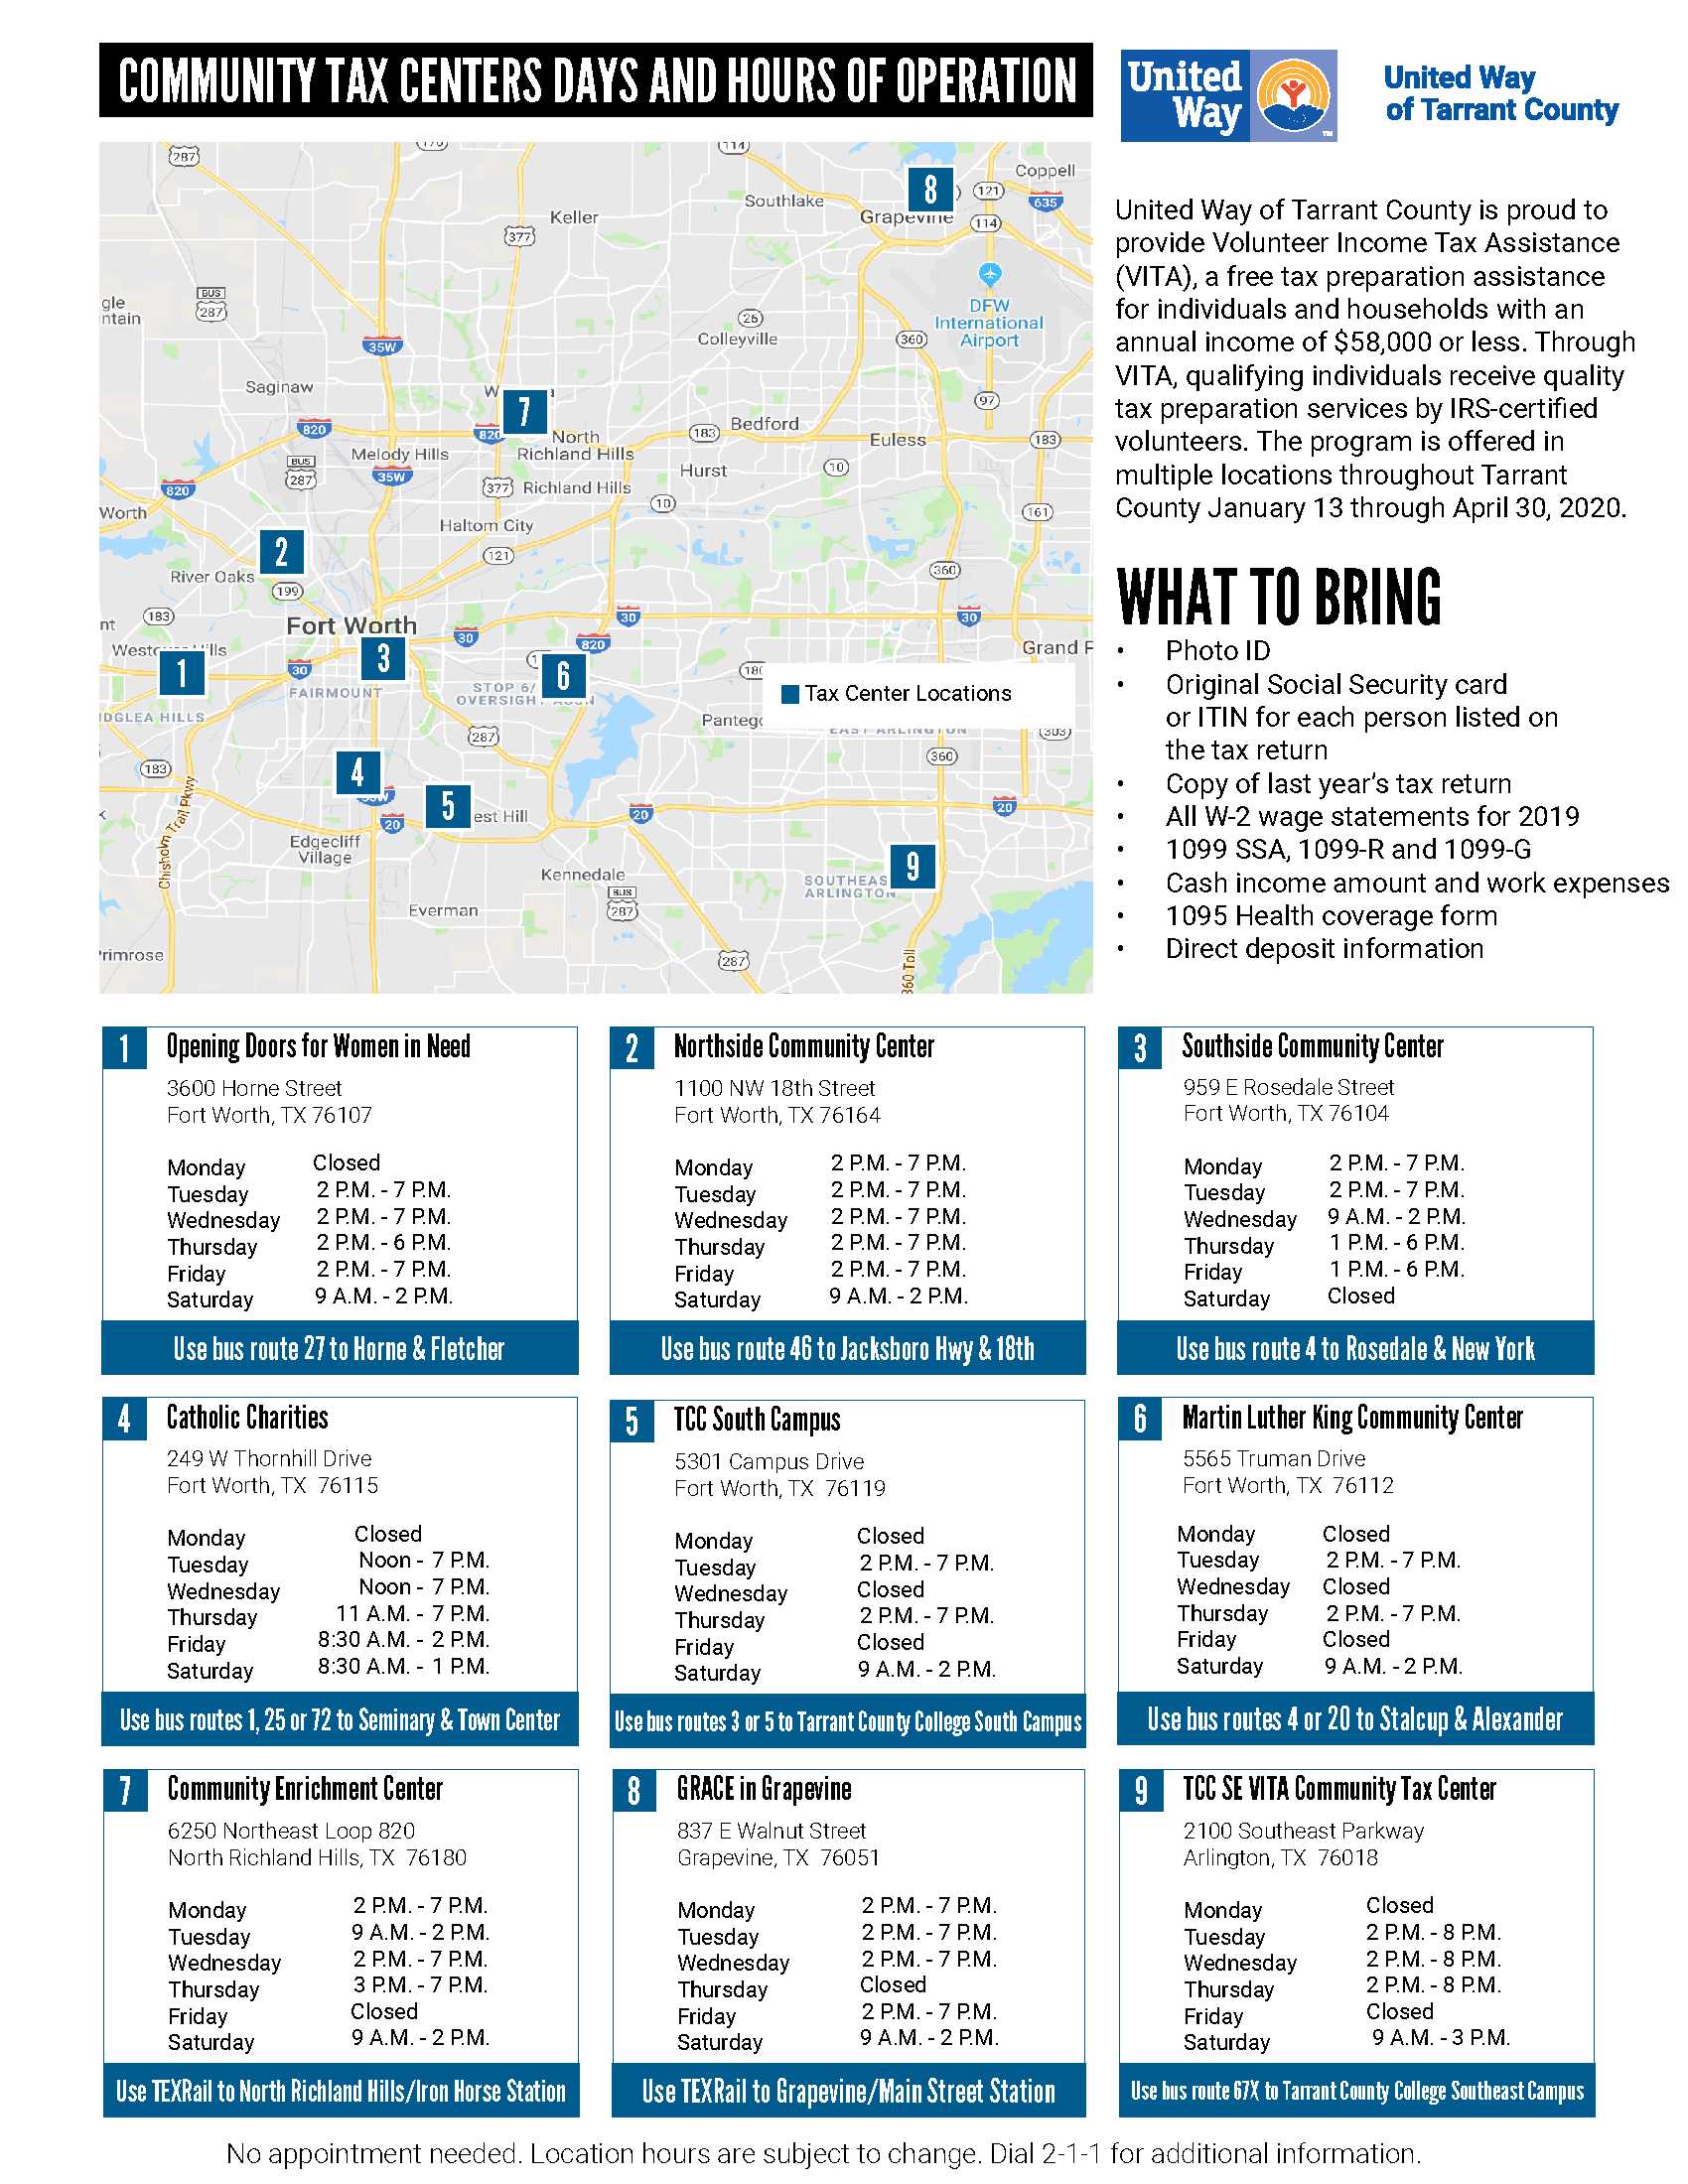 United Way Tax Center Map & Hours of Operations